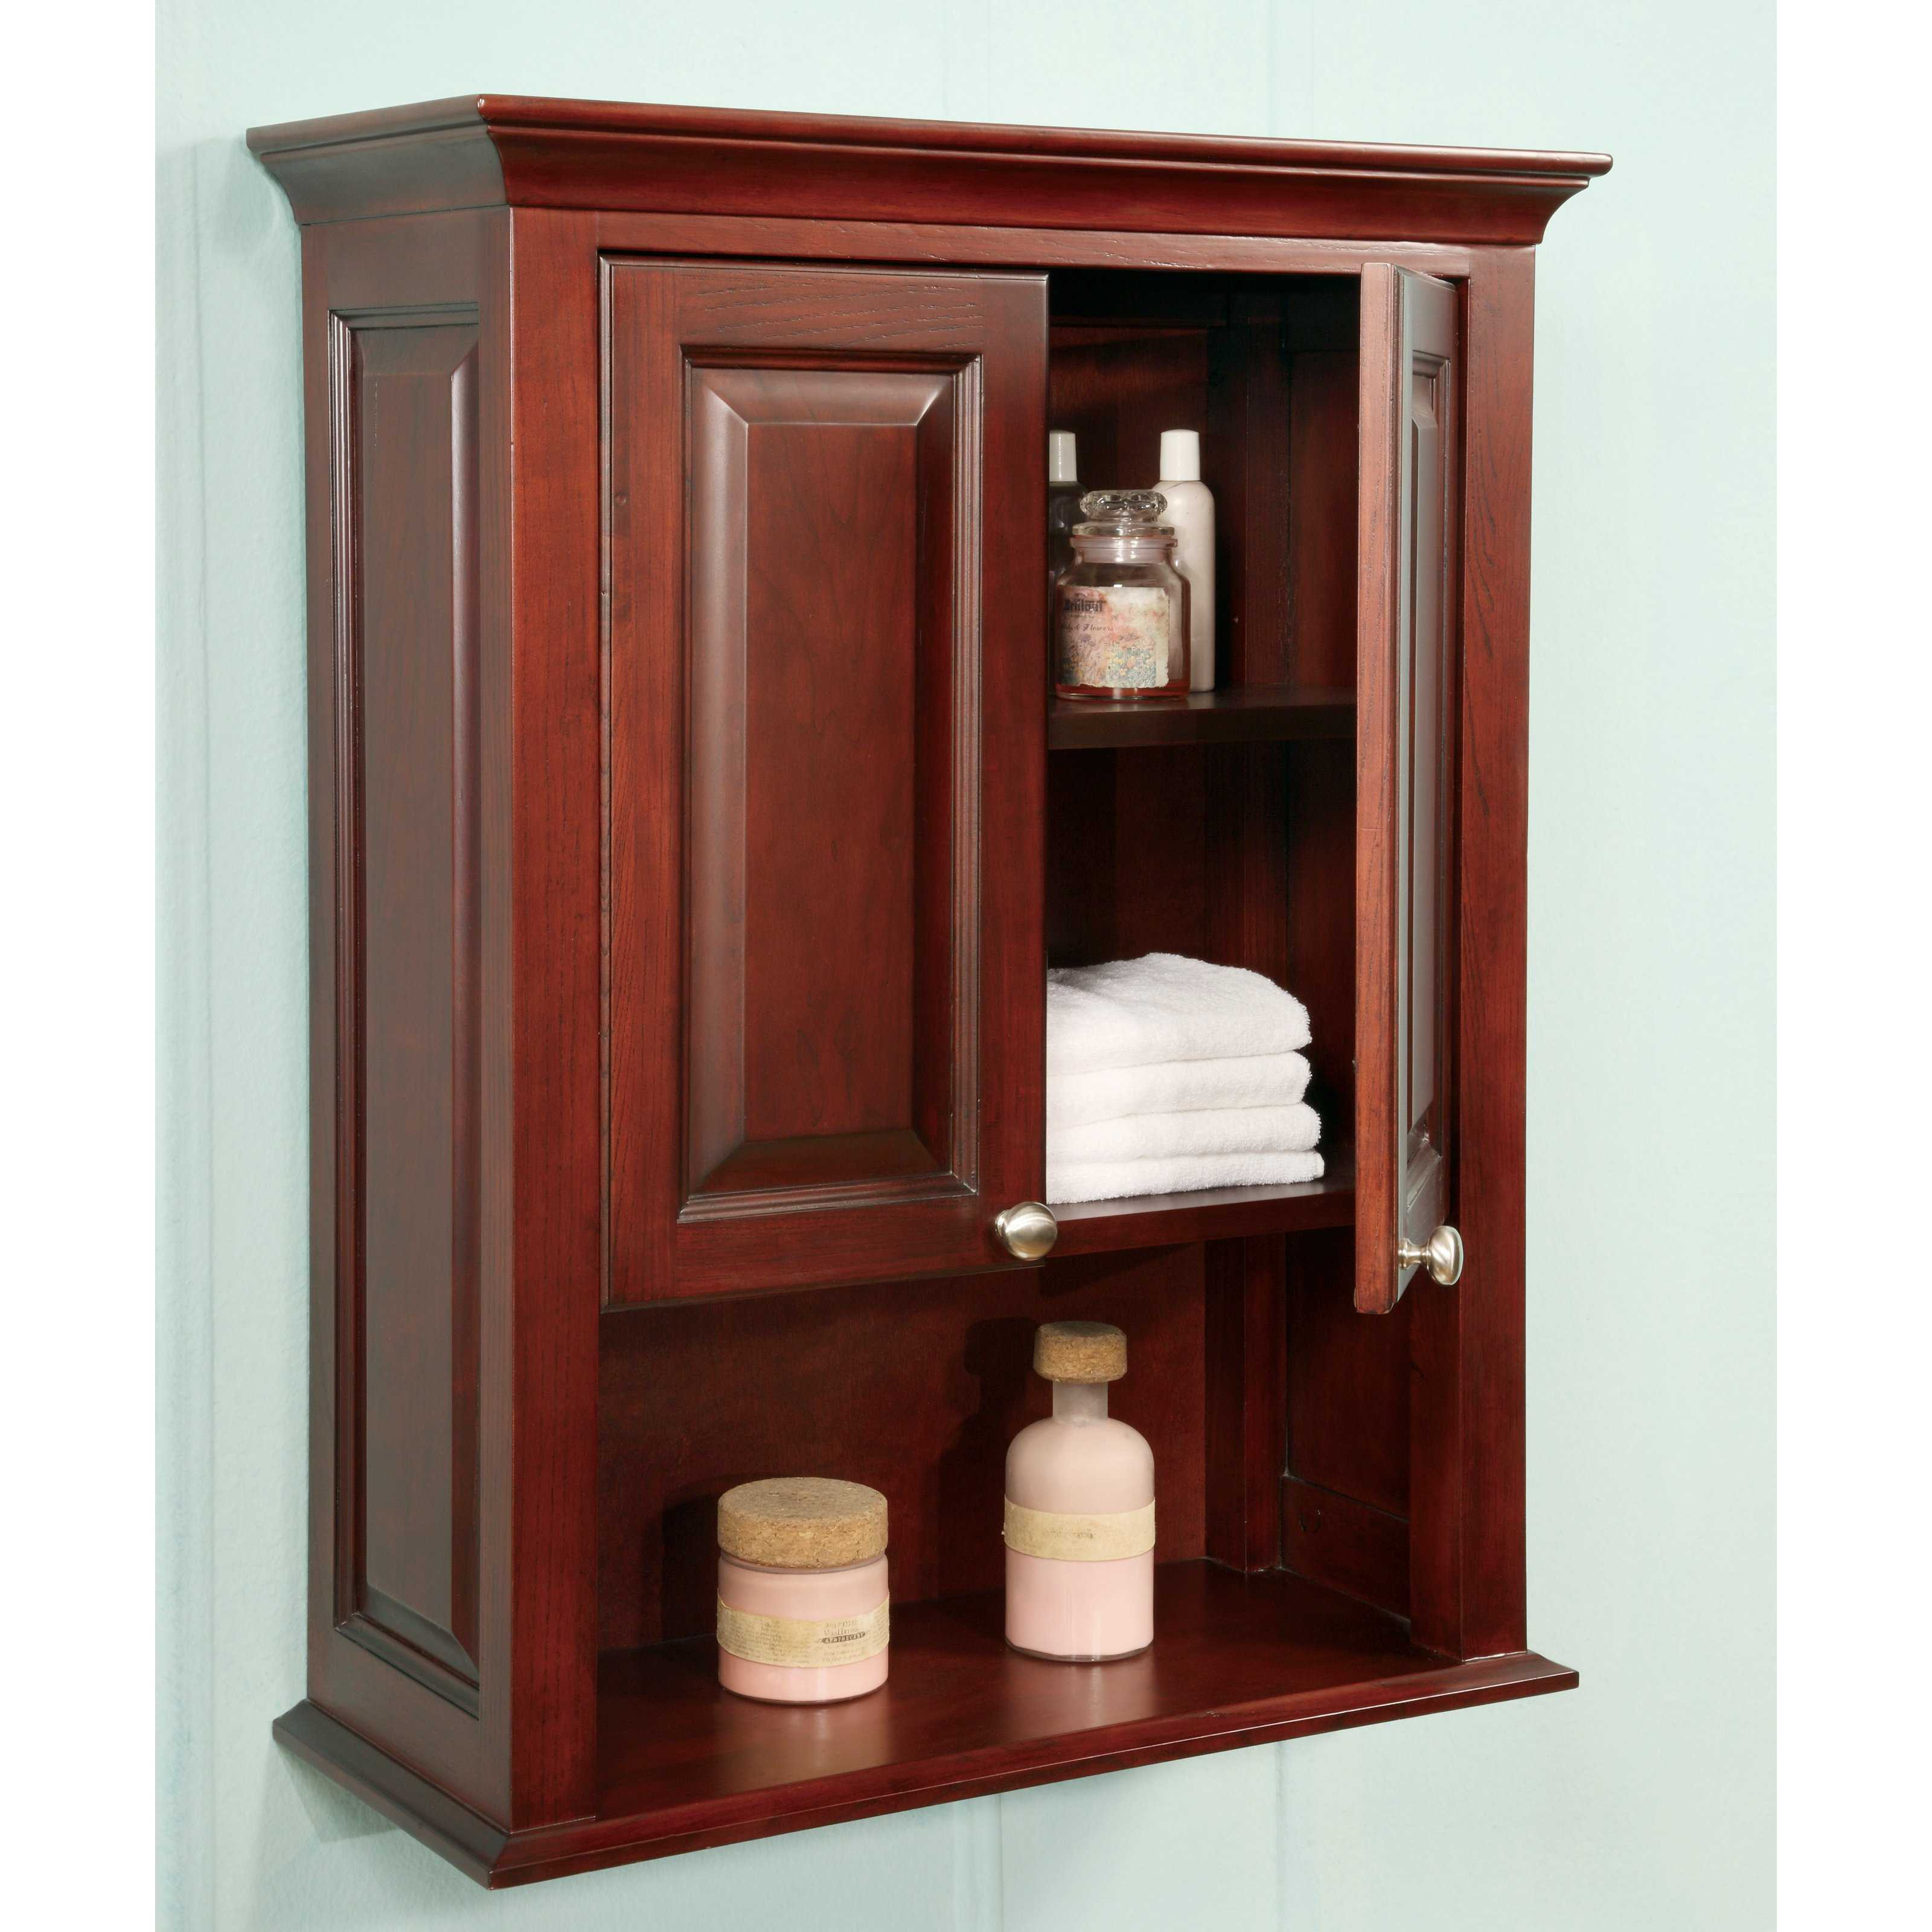 Fascinating Cherry Bathroom Wall Cabinet Ideas And Blossom Images with regard to sizing 3200 X 3200